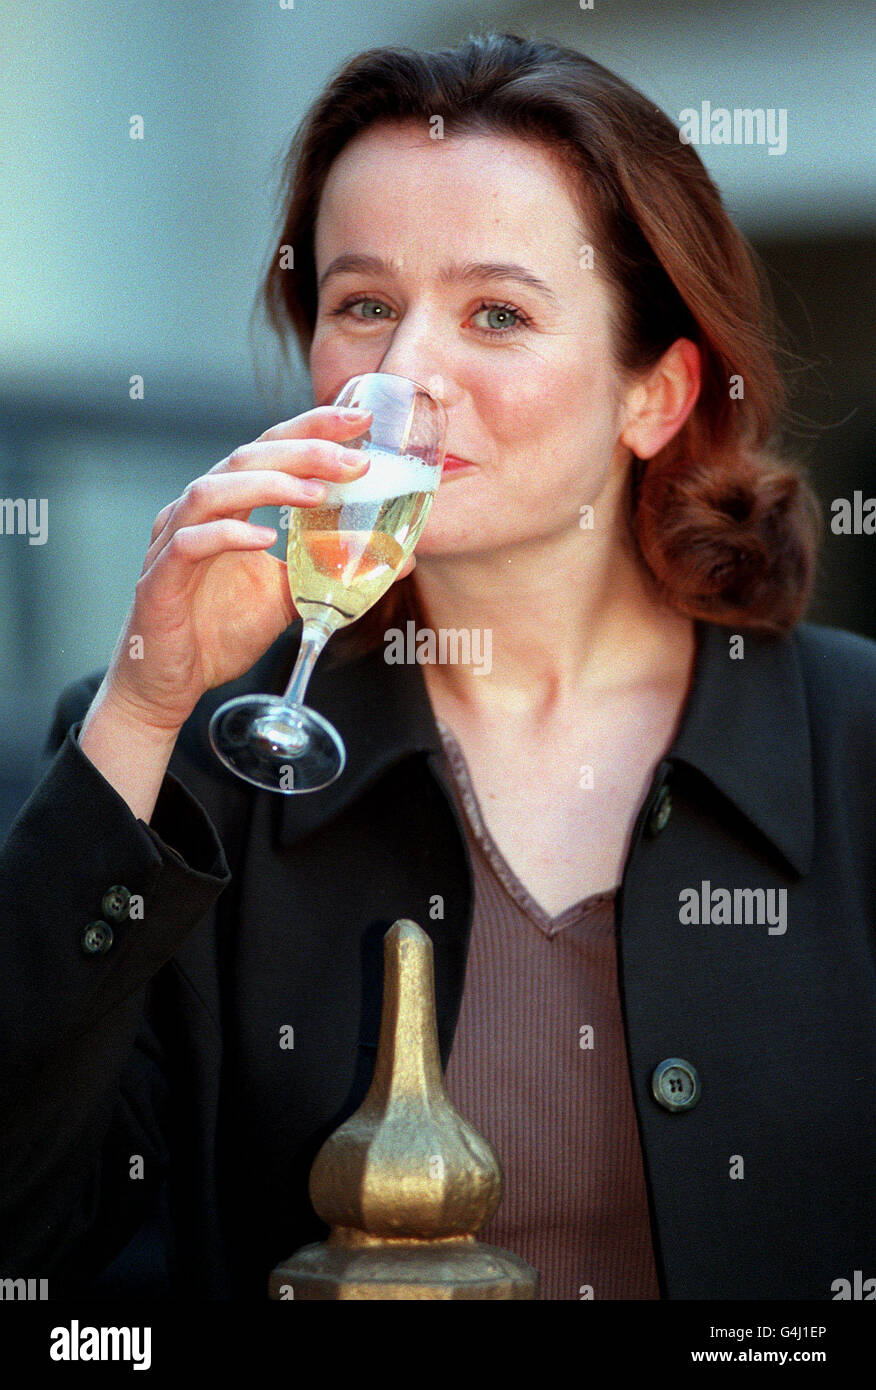 Emily Watson celebrates her Oscar nomination in the Best Actress category, for her portrayal of cellist Jaqueline Du Pre in the film Hilary And Jackie. Stock Photo